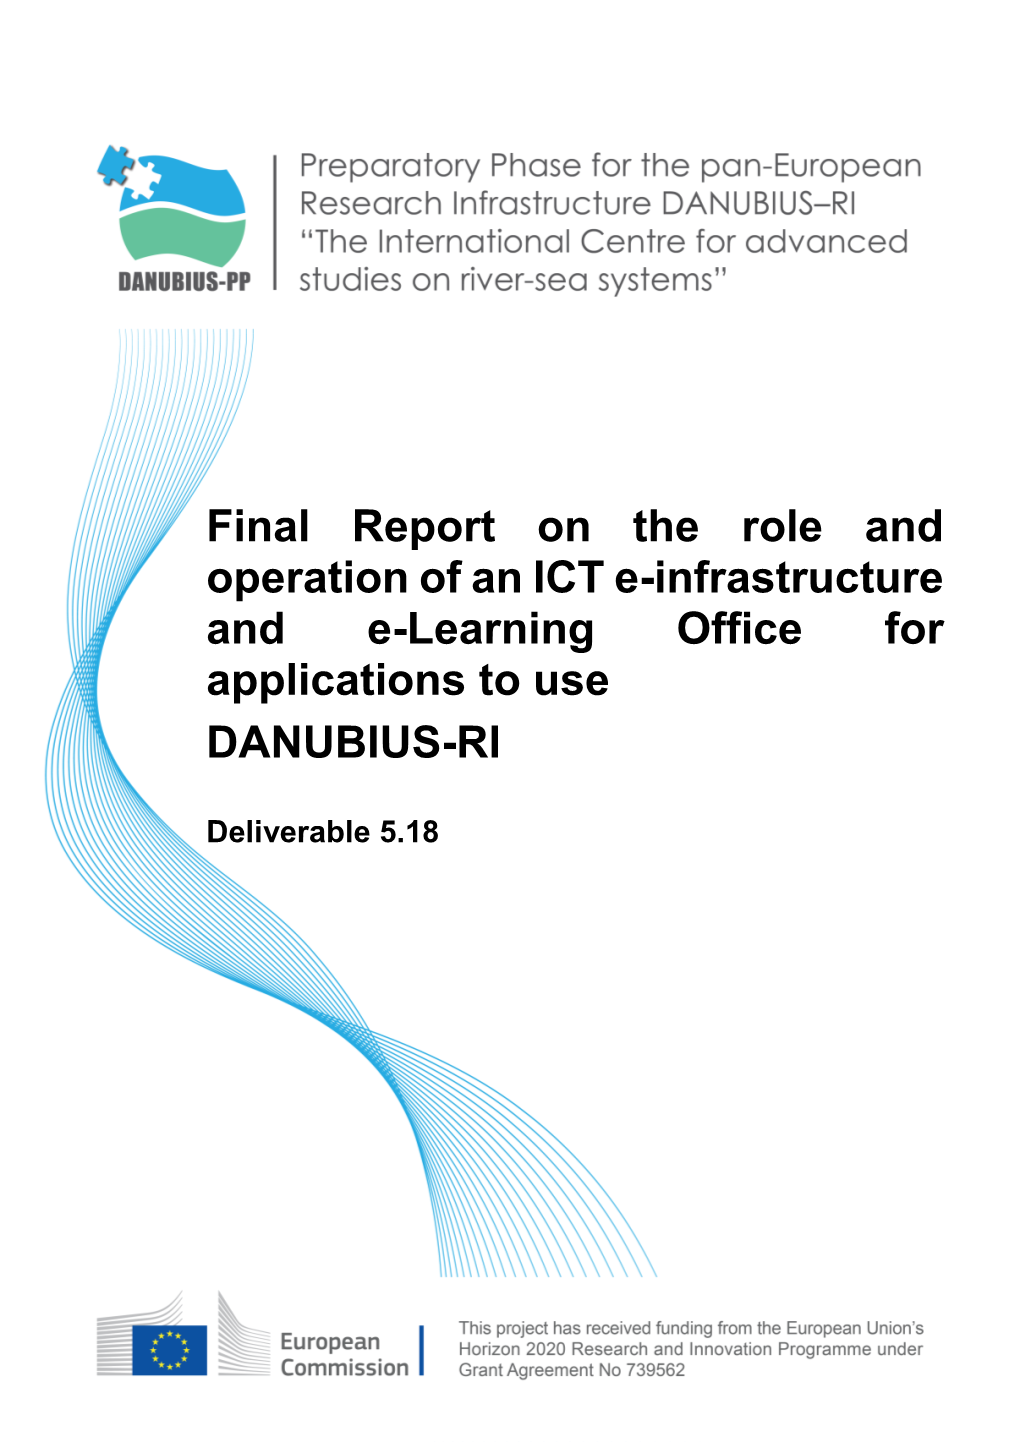 Final Report on the Role and Operation of an ICT E-Infrastructure and E-Learning Office for Applications to Use DANUBIUS-RI